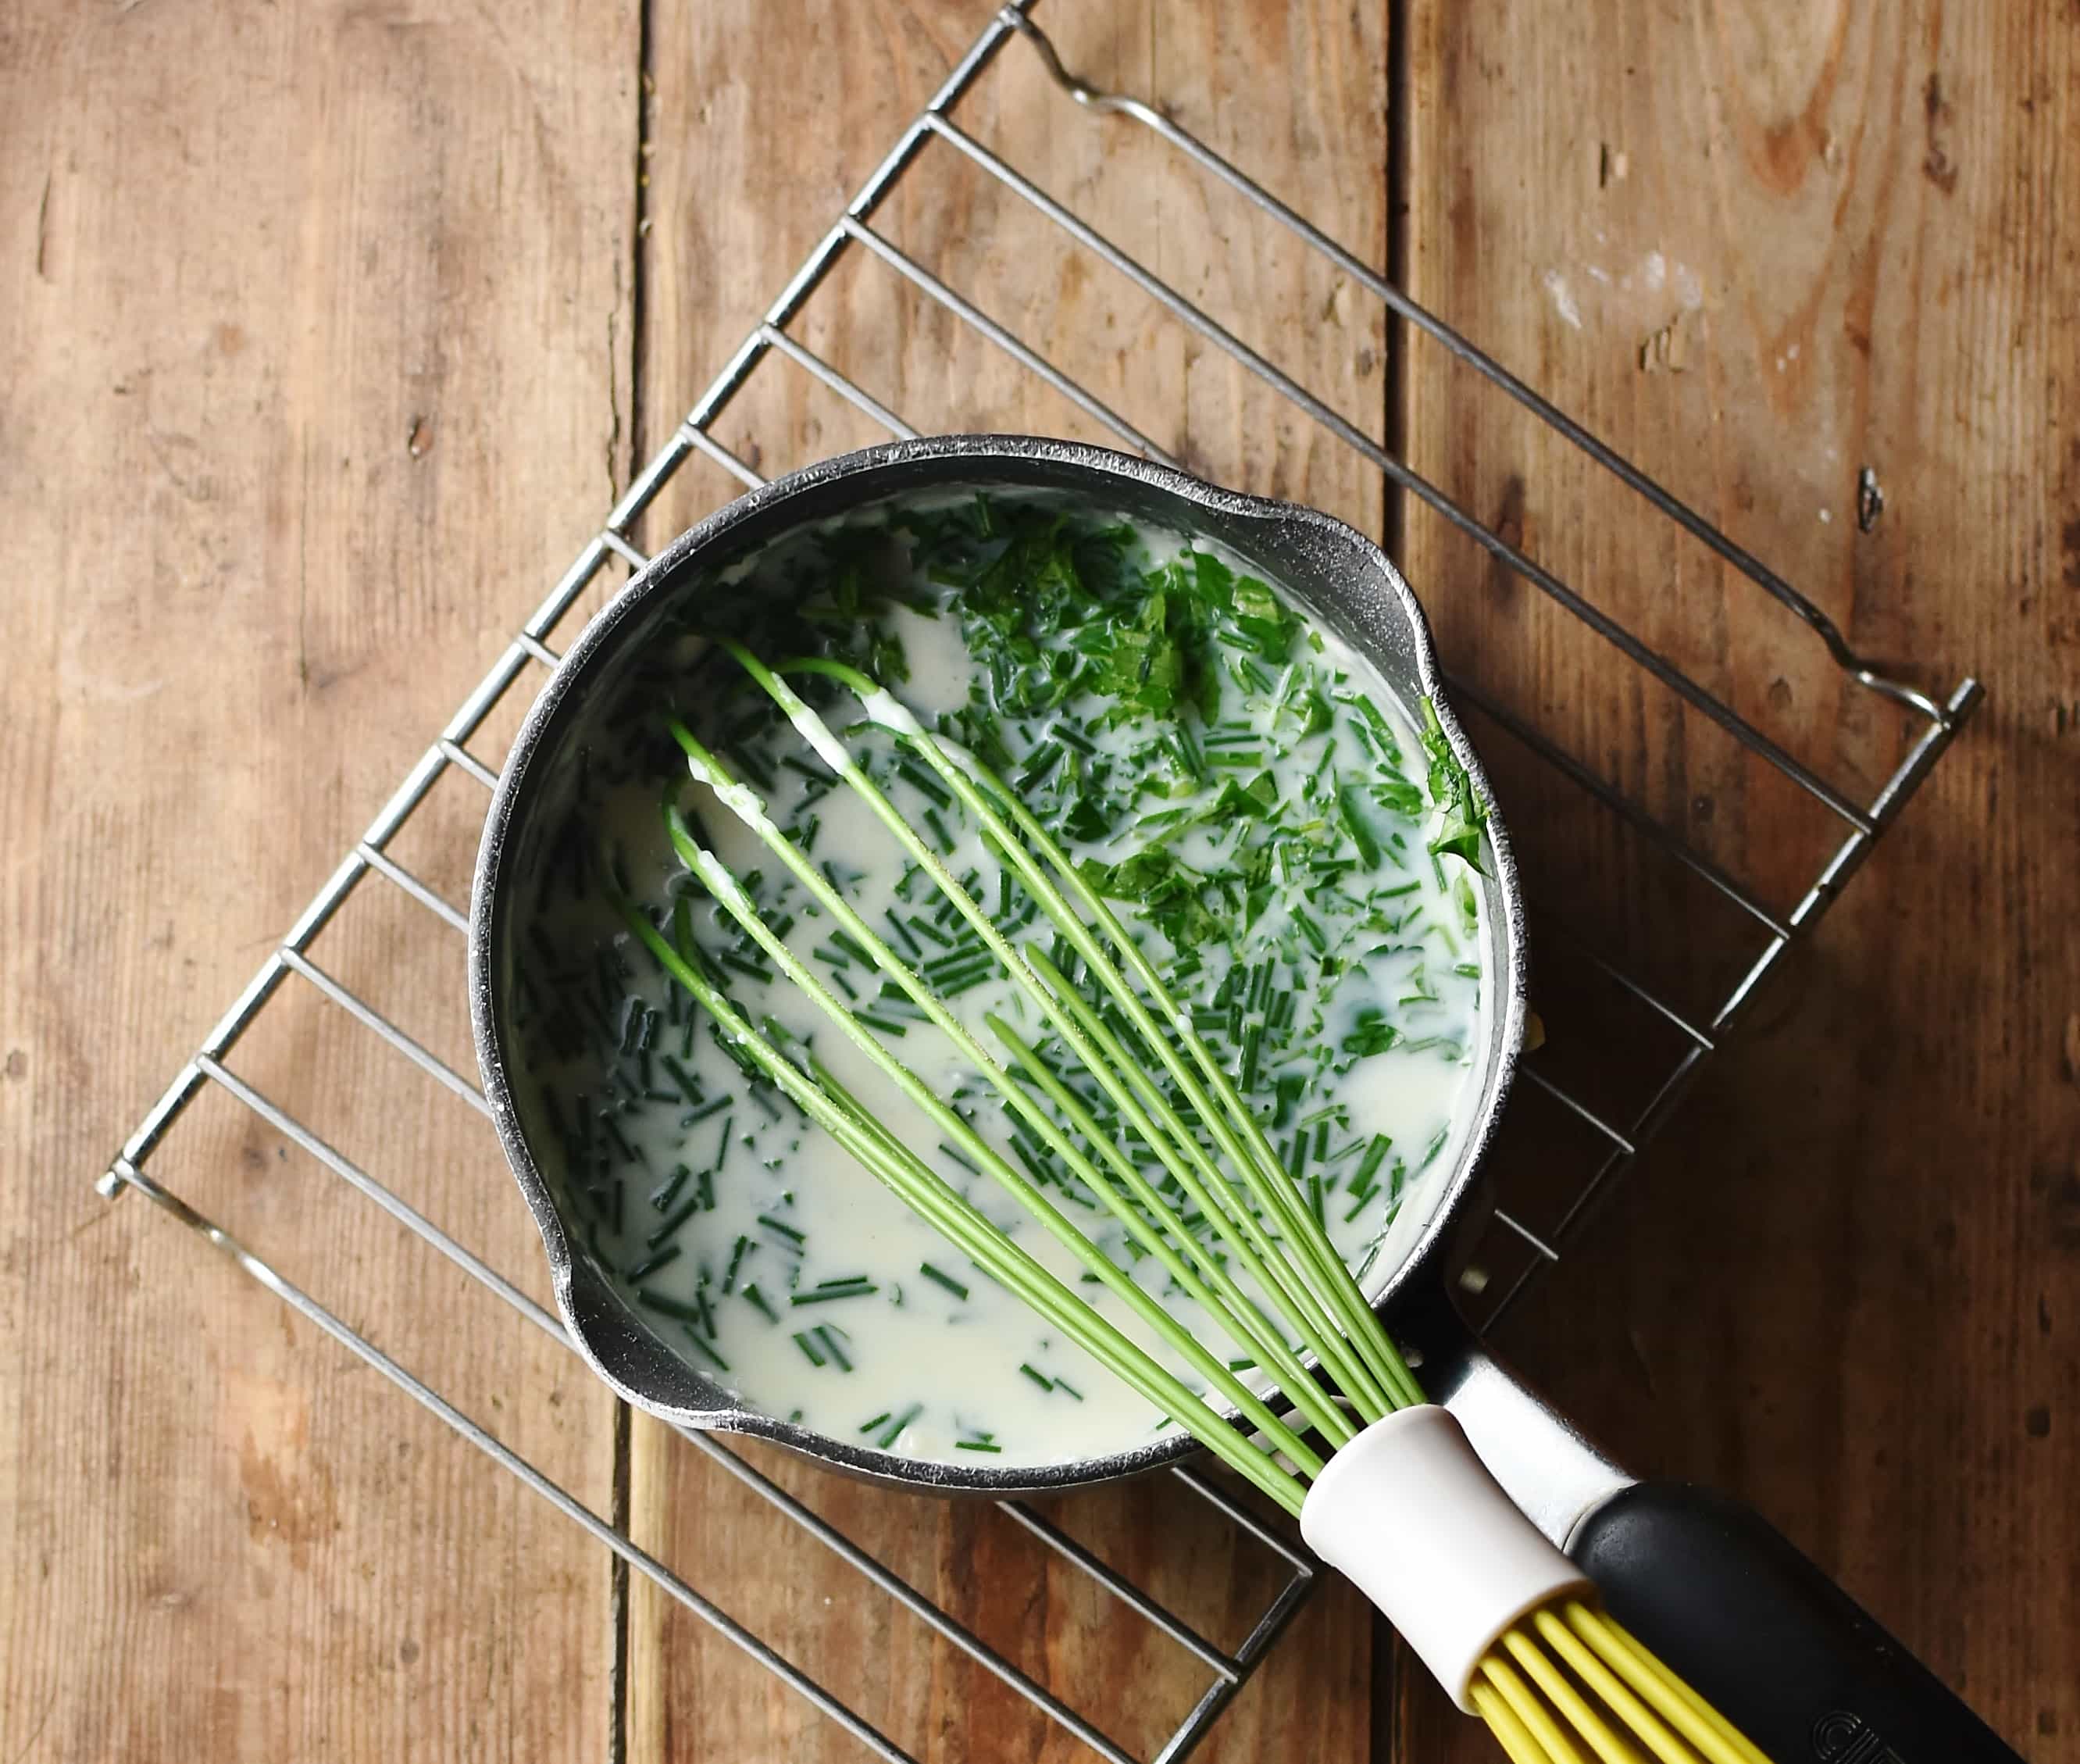 Sauce with herbs and green whisk in saucepan.